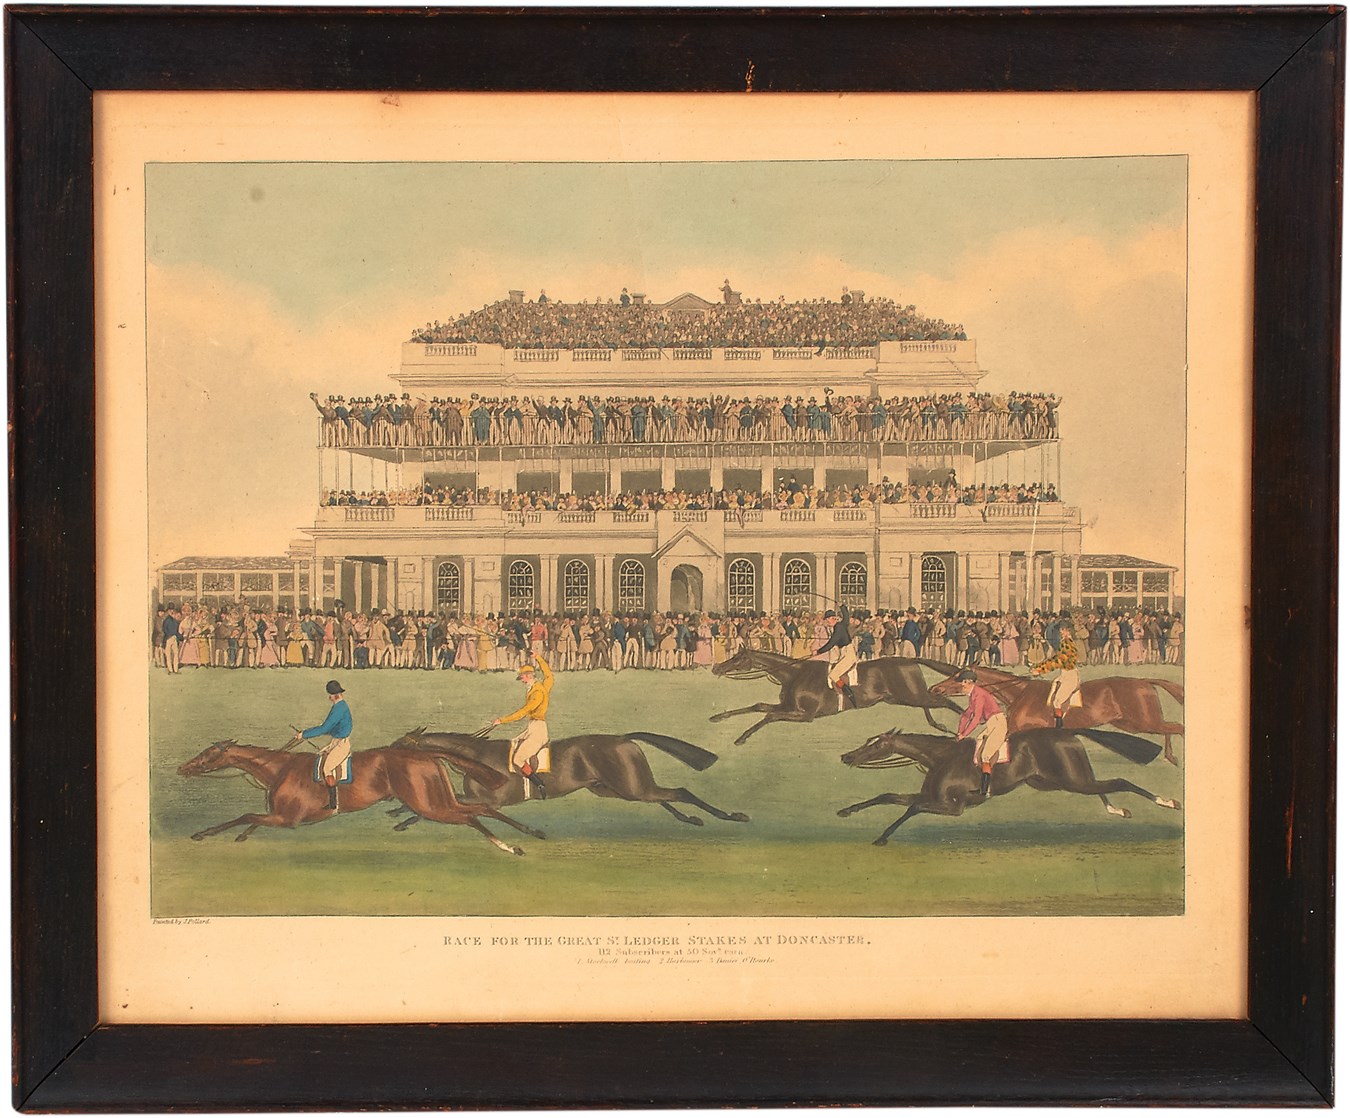 - Circa 1852 "Race for the Great St. Ledger Stakes at Doncaster" Watercolor Aquatint by J. Pollard